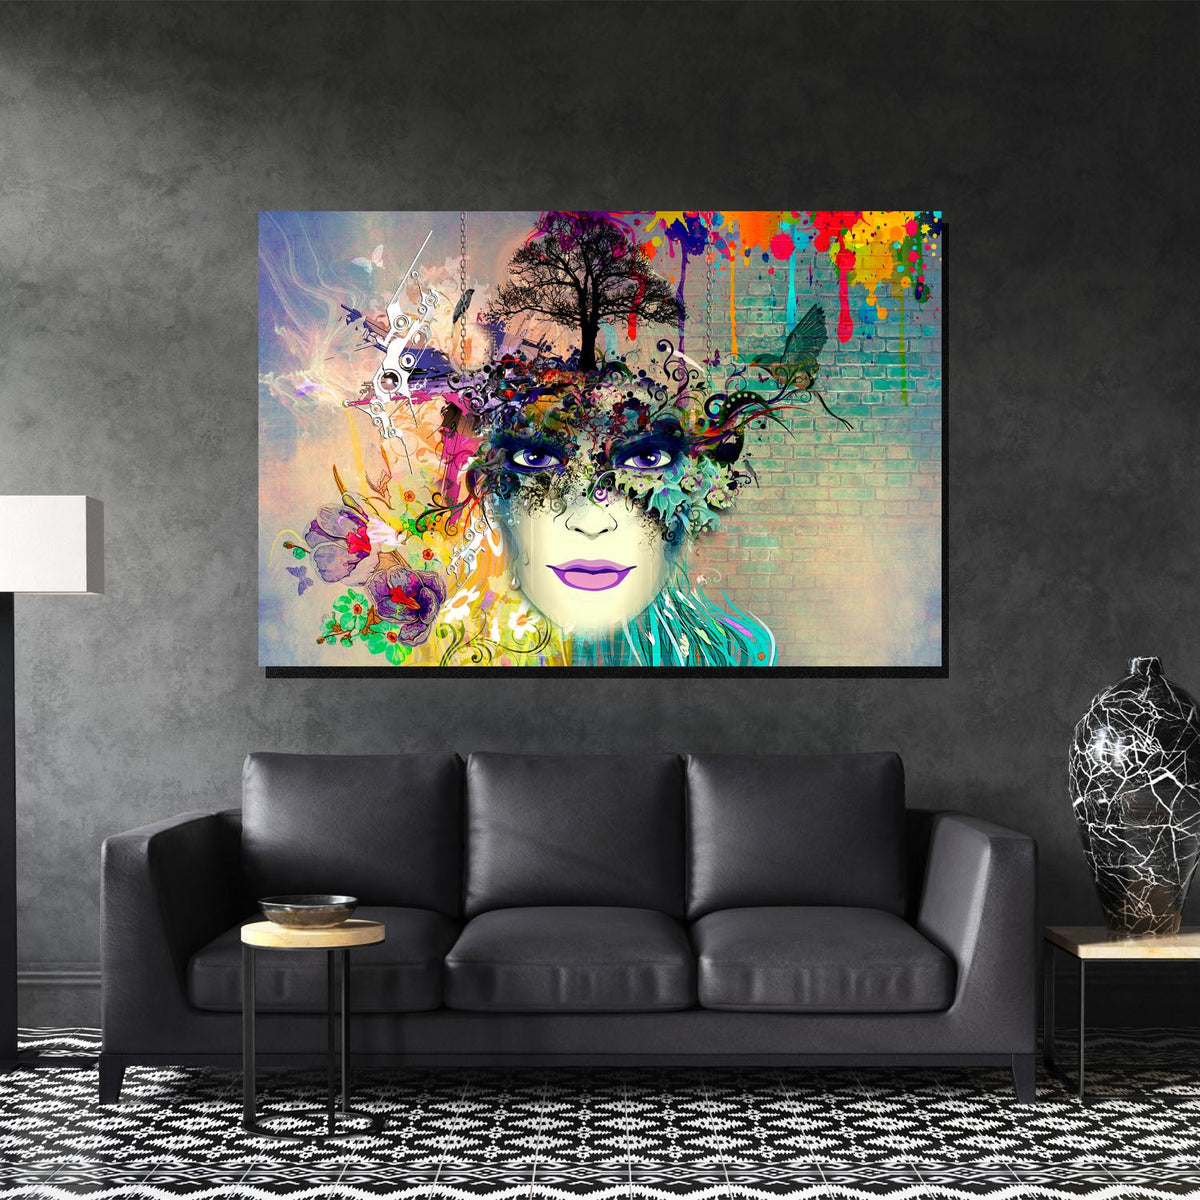 https://cdn.shopify.com/s/files/1/0387/9986/8044/products/AbstractPortraitofaWomanCanvasArtPrintStretched-1.jpg